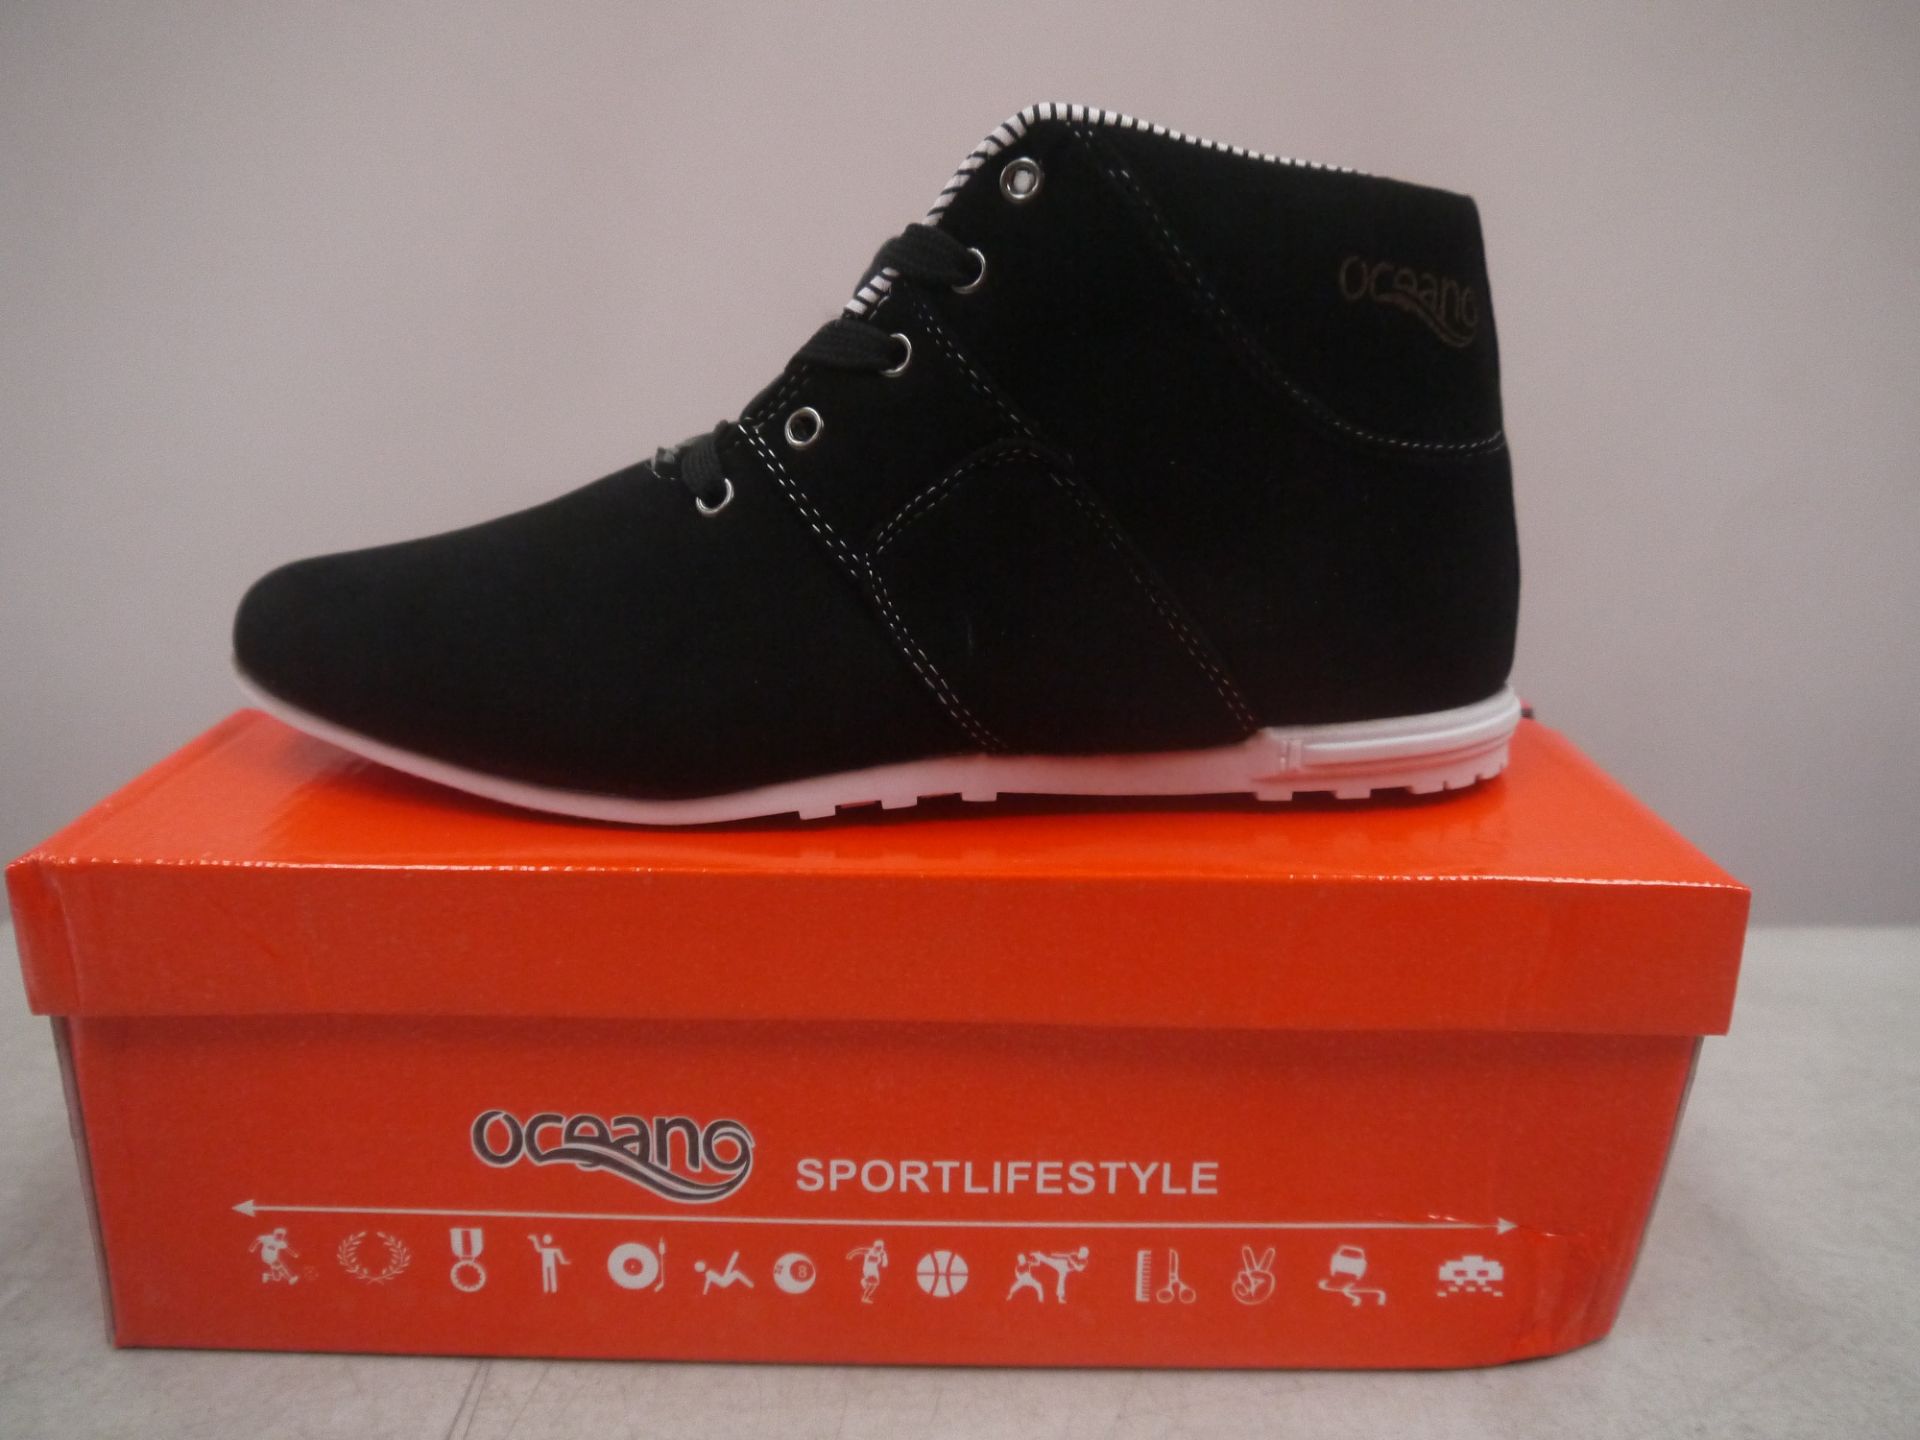 Mens Oceano Trainer Boot black suede style size 41, UK7 brand new and boxed